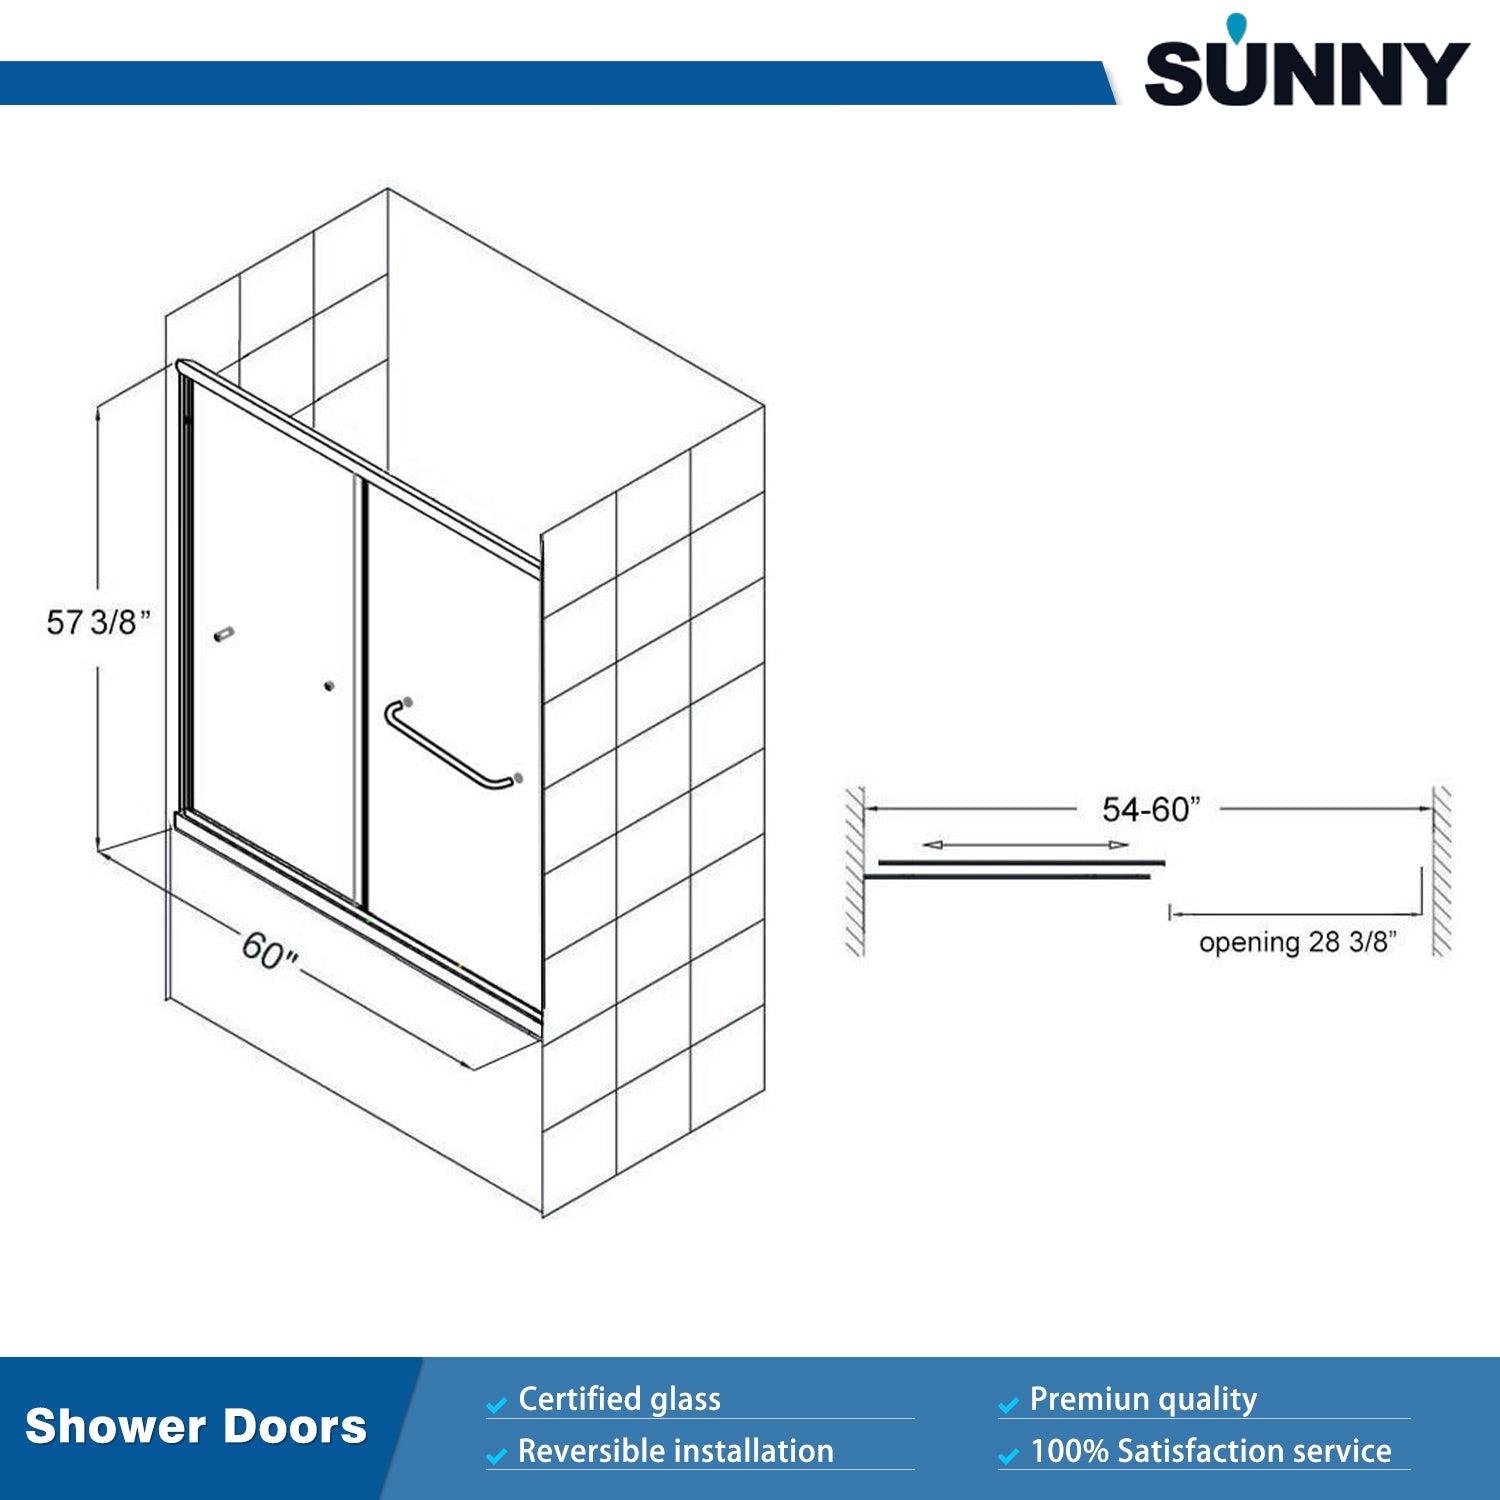 SUNNY SHOWER 60 in. W x 57.4 in. H Bathtub Double Sliding Doors Size Chart